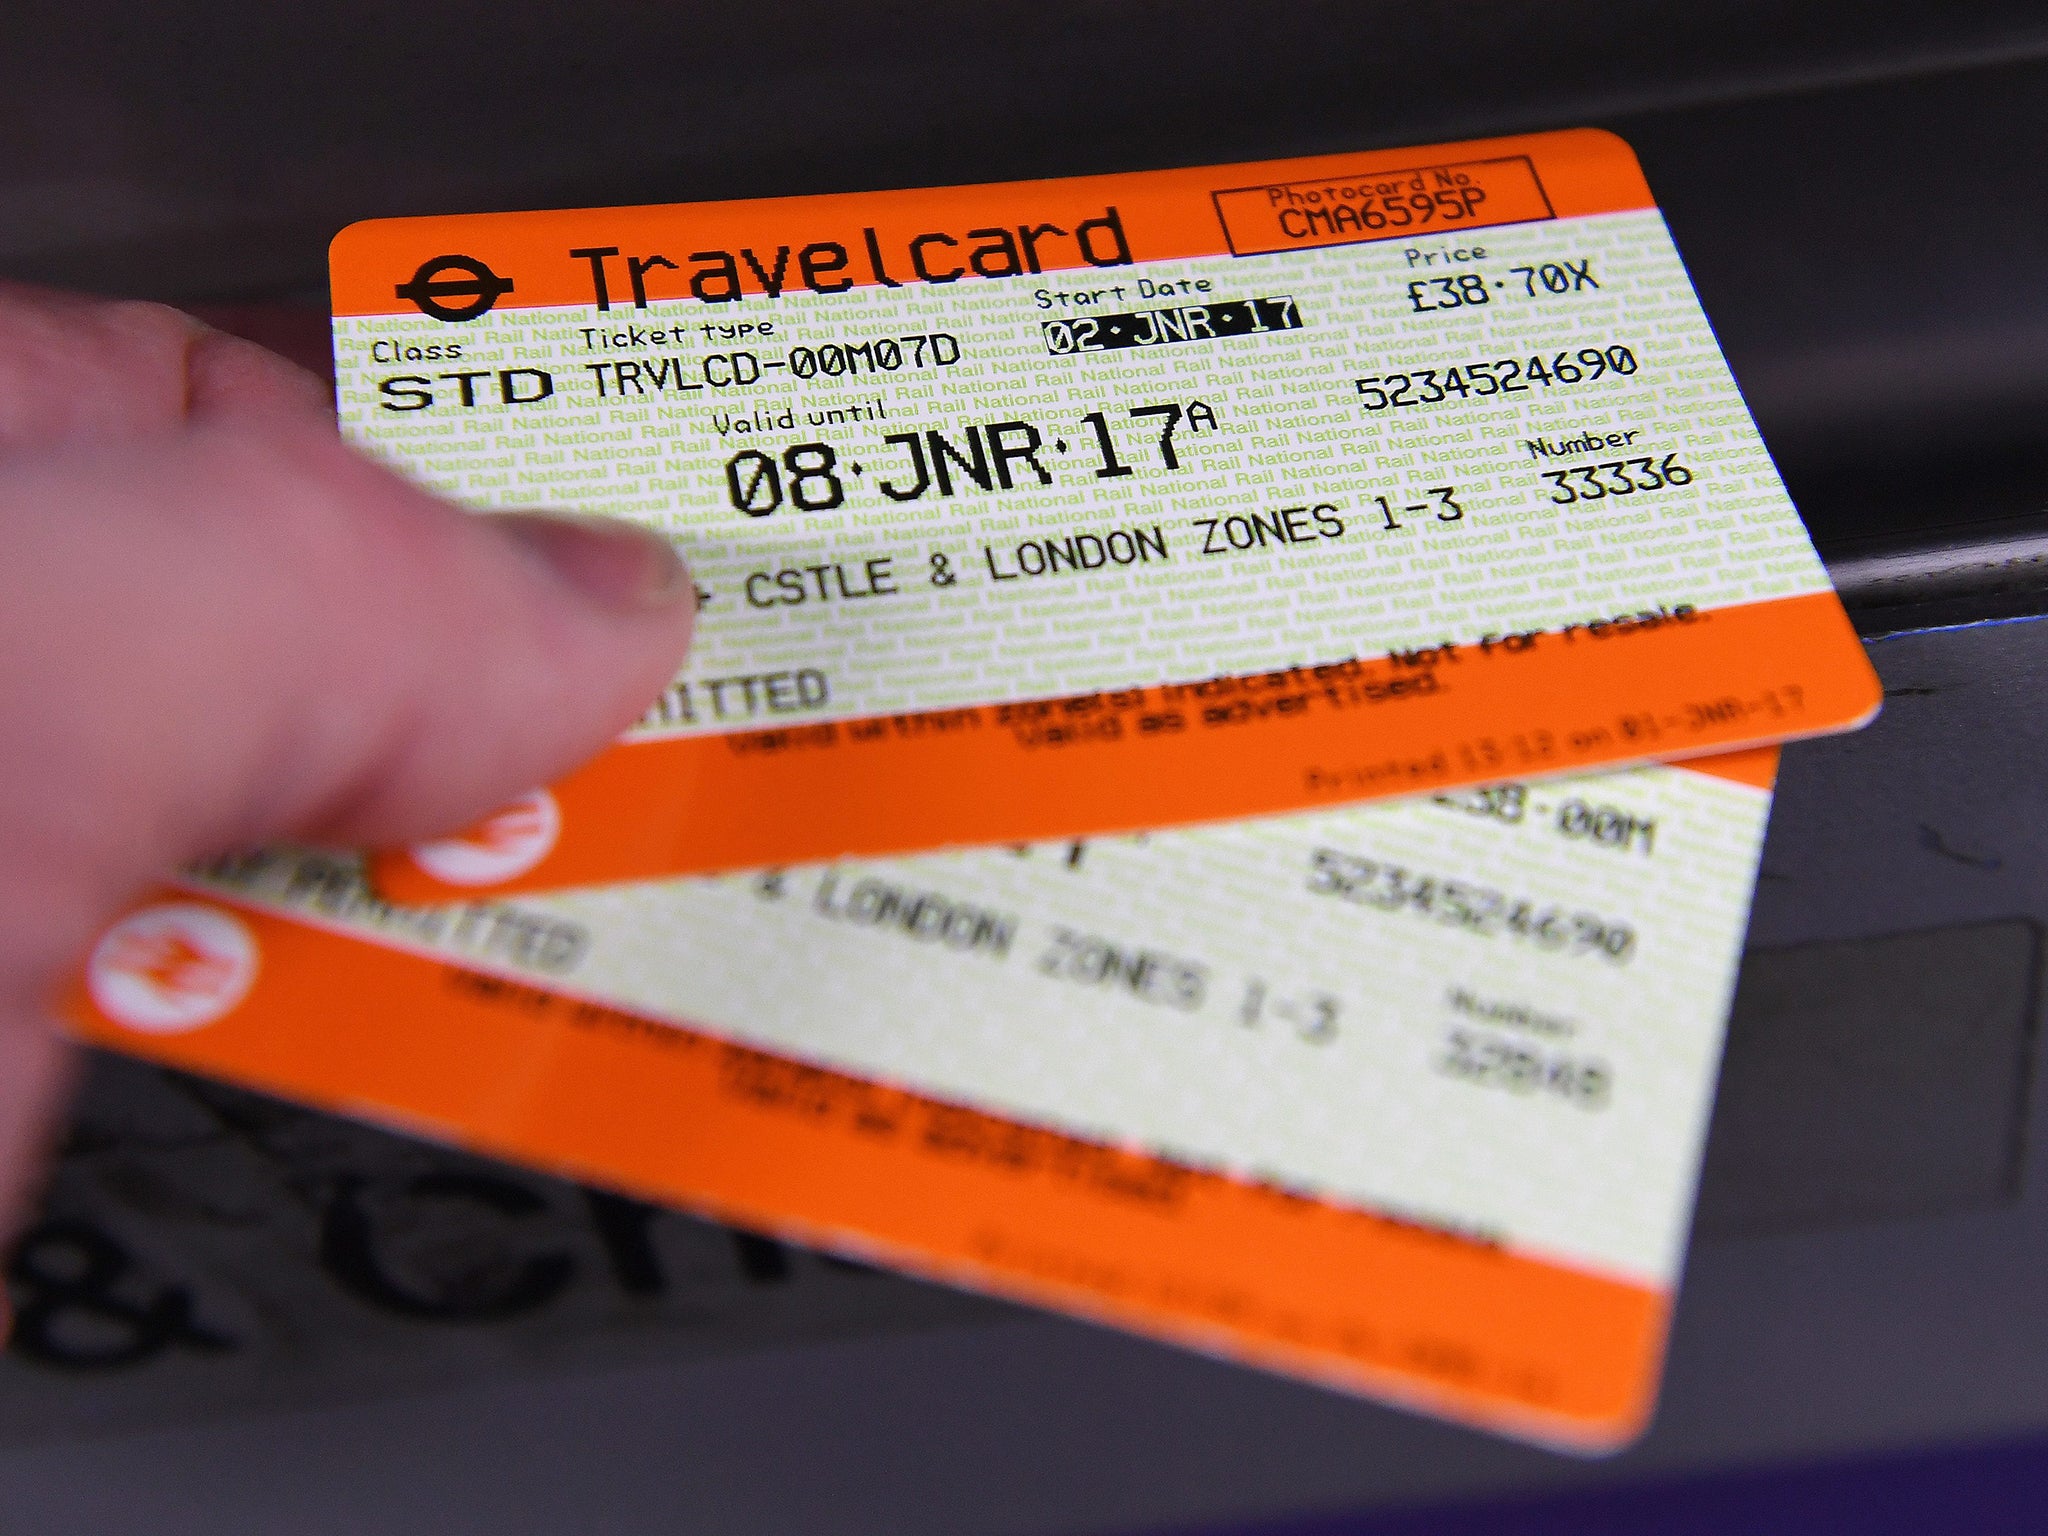 Train fares in Britain increased by an average of 2.3 per cent